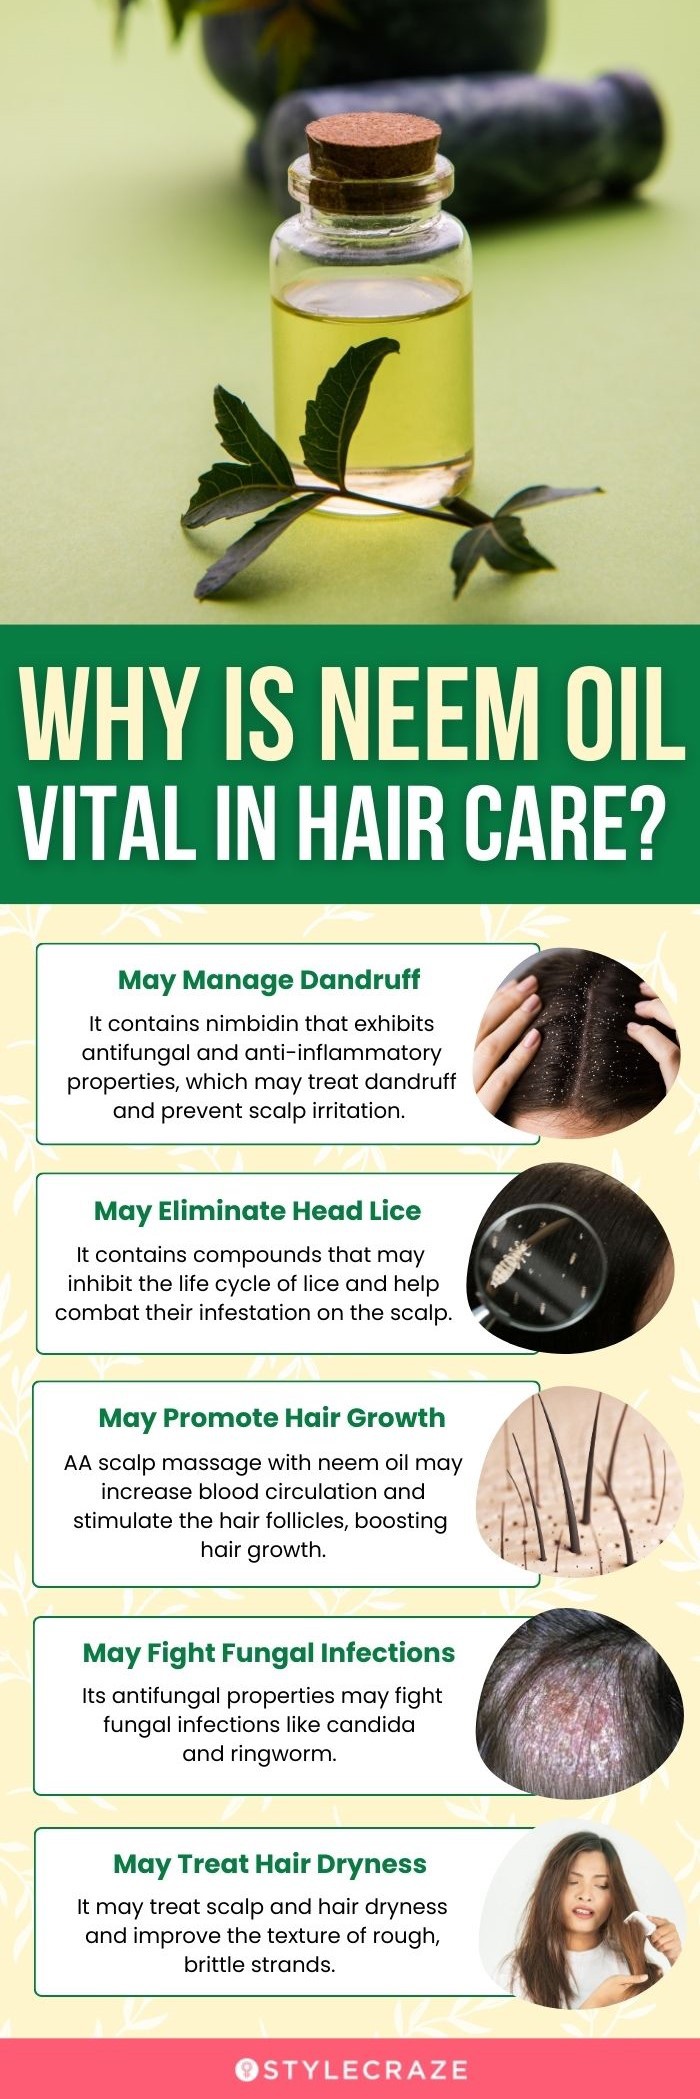 why is neem oil vital in hair care (infographic)